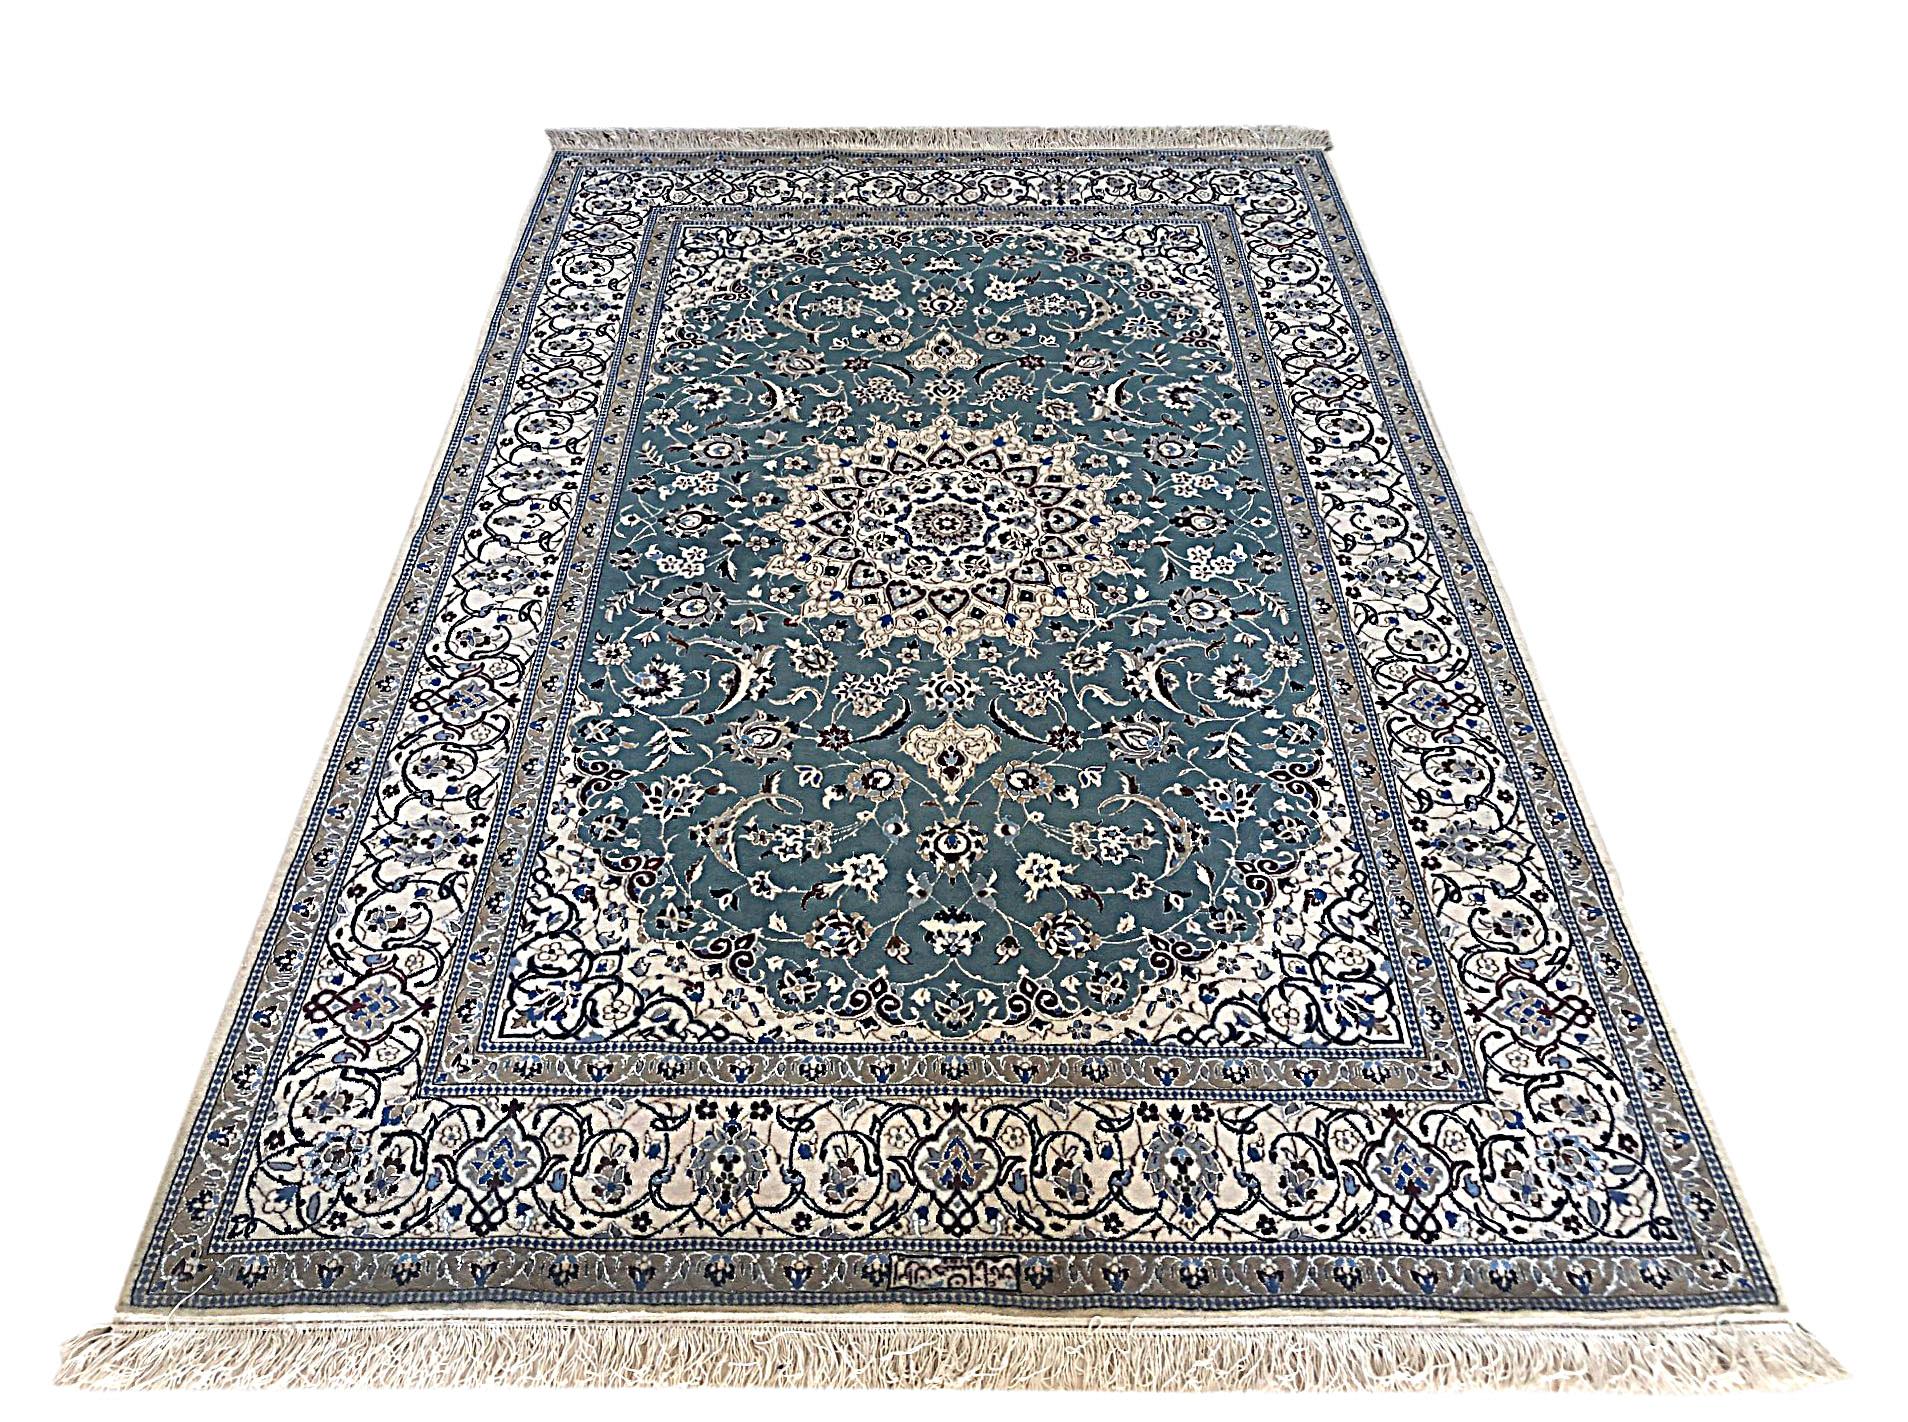 This authentic Persian handmade Nain (6 LA) rug has wool and silk pile with cotton foundation. Nain is a city in Iran that is well known for producing fine handmade rug. Nain rugs have a high reputation and are very popular. This beautiful rug has